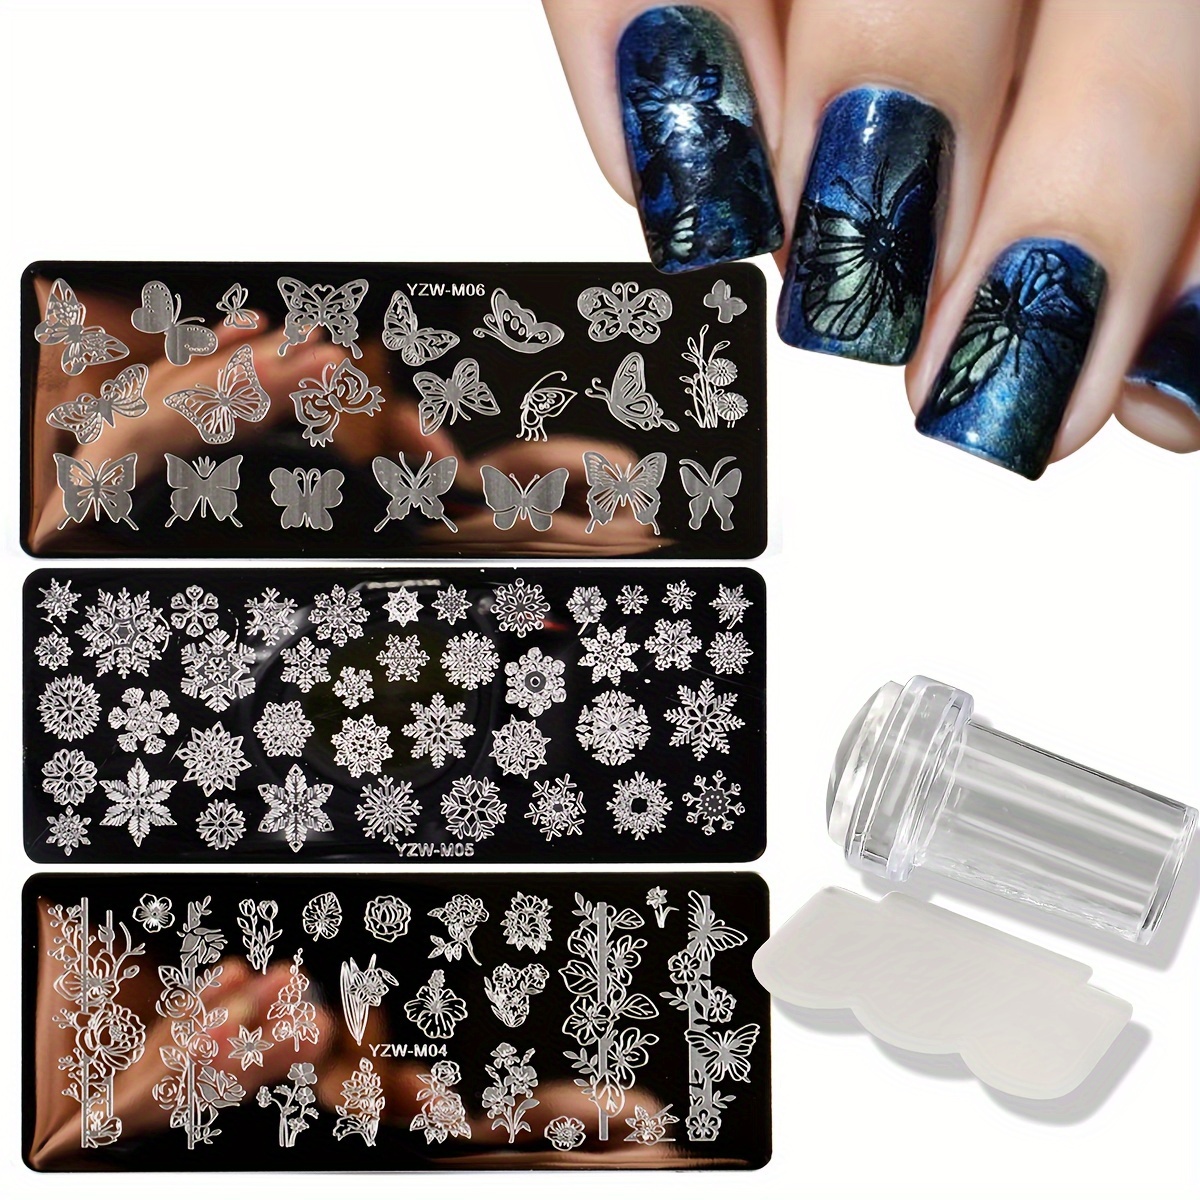 

Nail Art Stamping Kit With Butterfly, Floral & Snowflake Designs - 5-piece Set Including Nail Stamping Plates, Stamper & Scraper - Diy Nail Design Tool For Manicure - Salon-quality, Alcohol Free